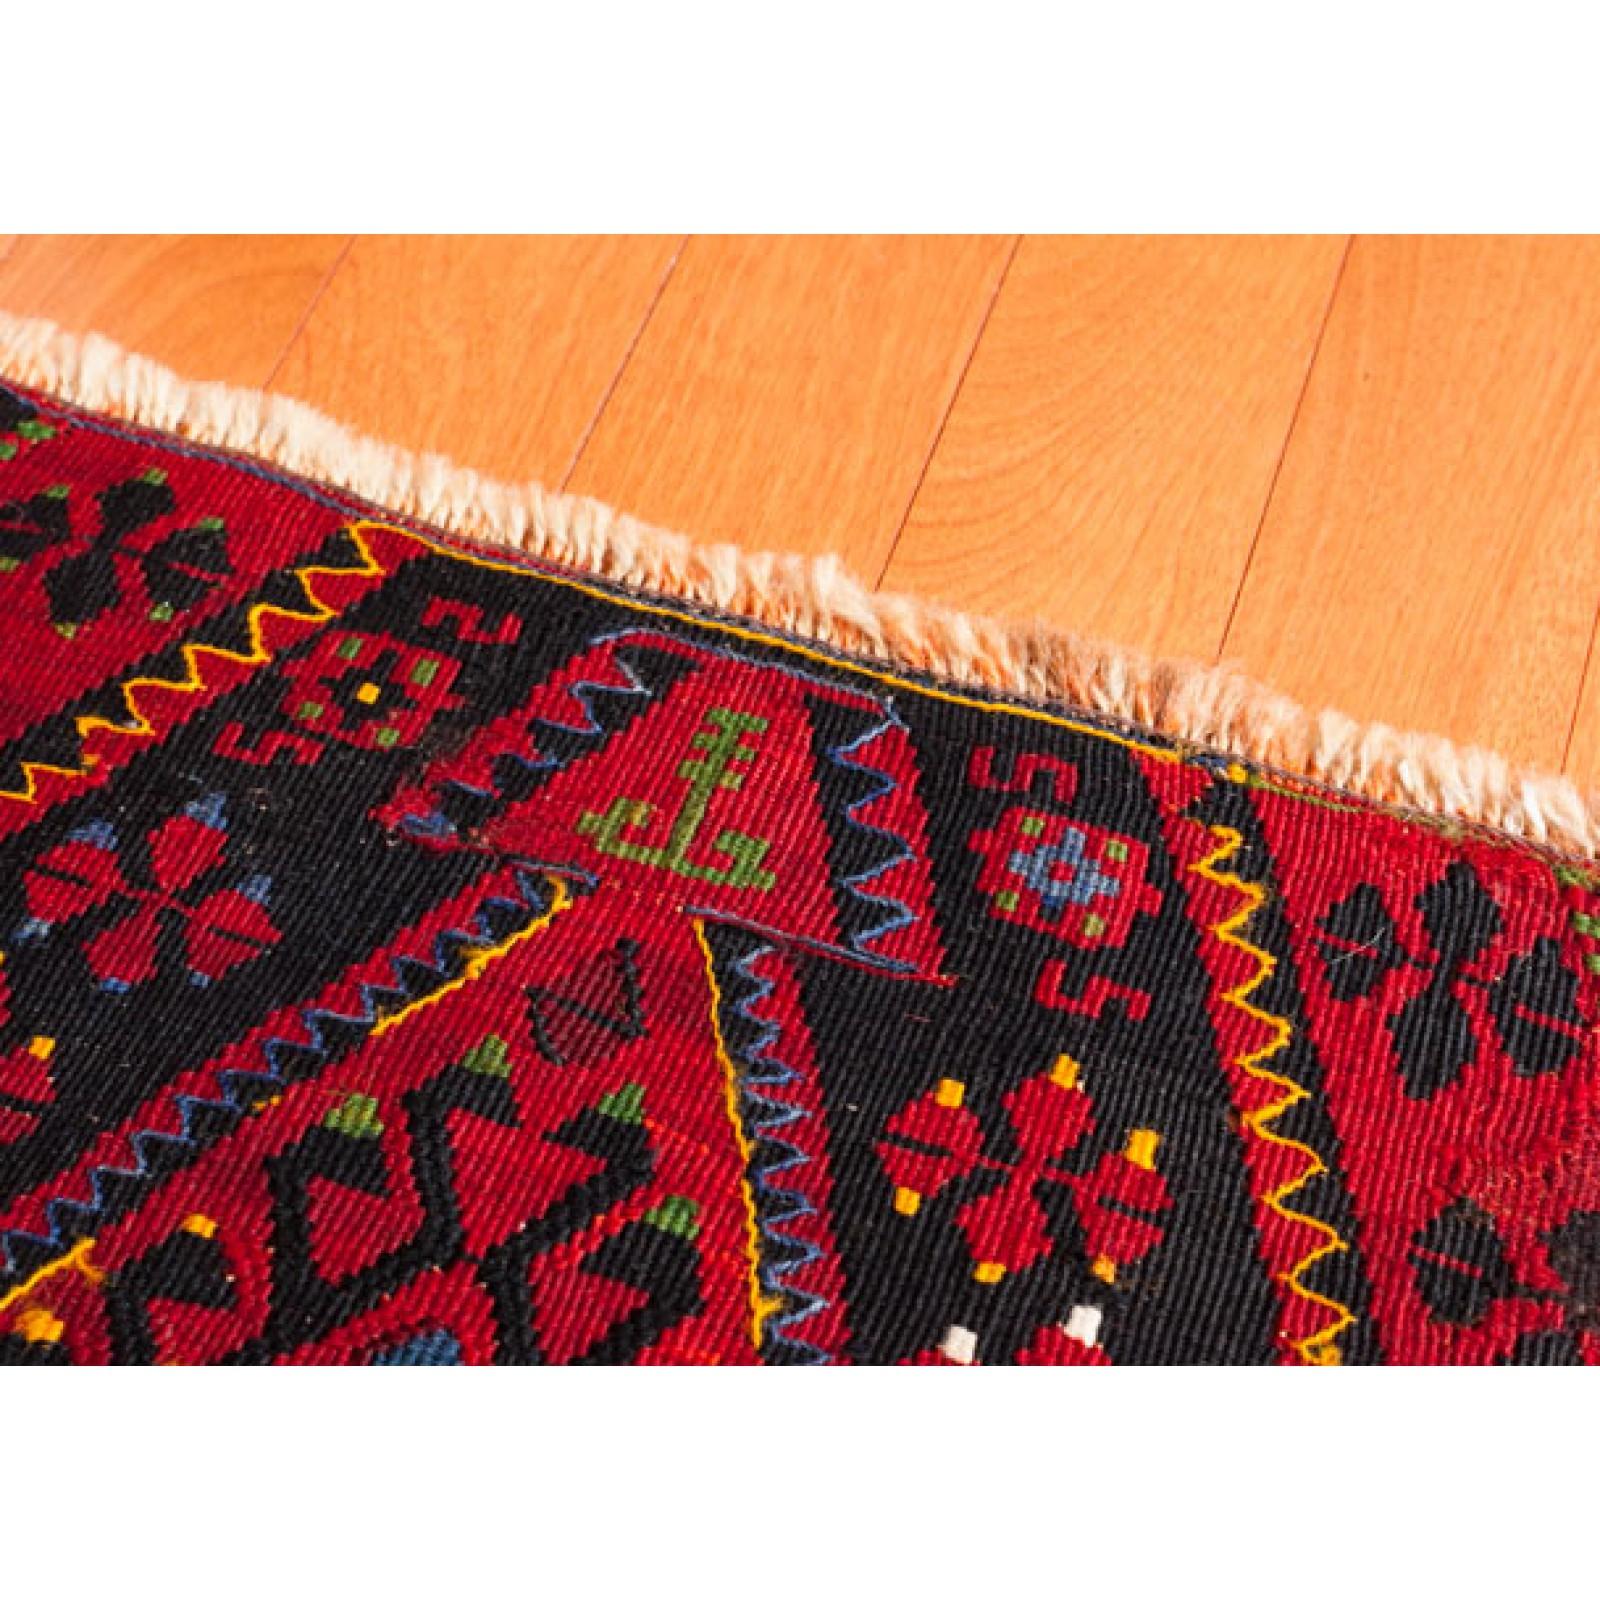 This is Eastern Anatolian Antique Small Entrance Mat Size Kilim from the Malatya region with a rare, beautiful color composition.

This highly collectible antique kilim has wonderful special colors and textures that are typical of an old kilim in